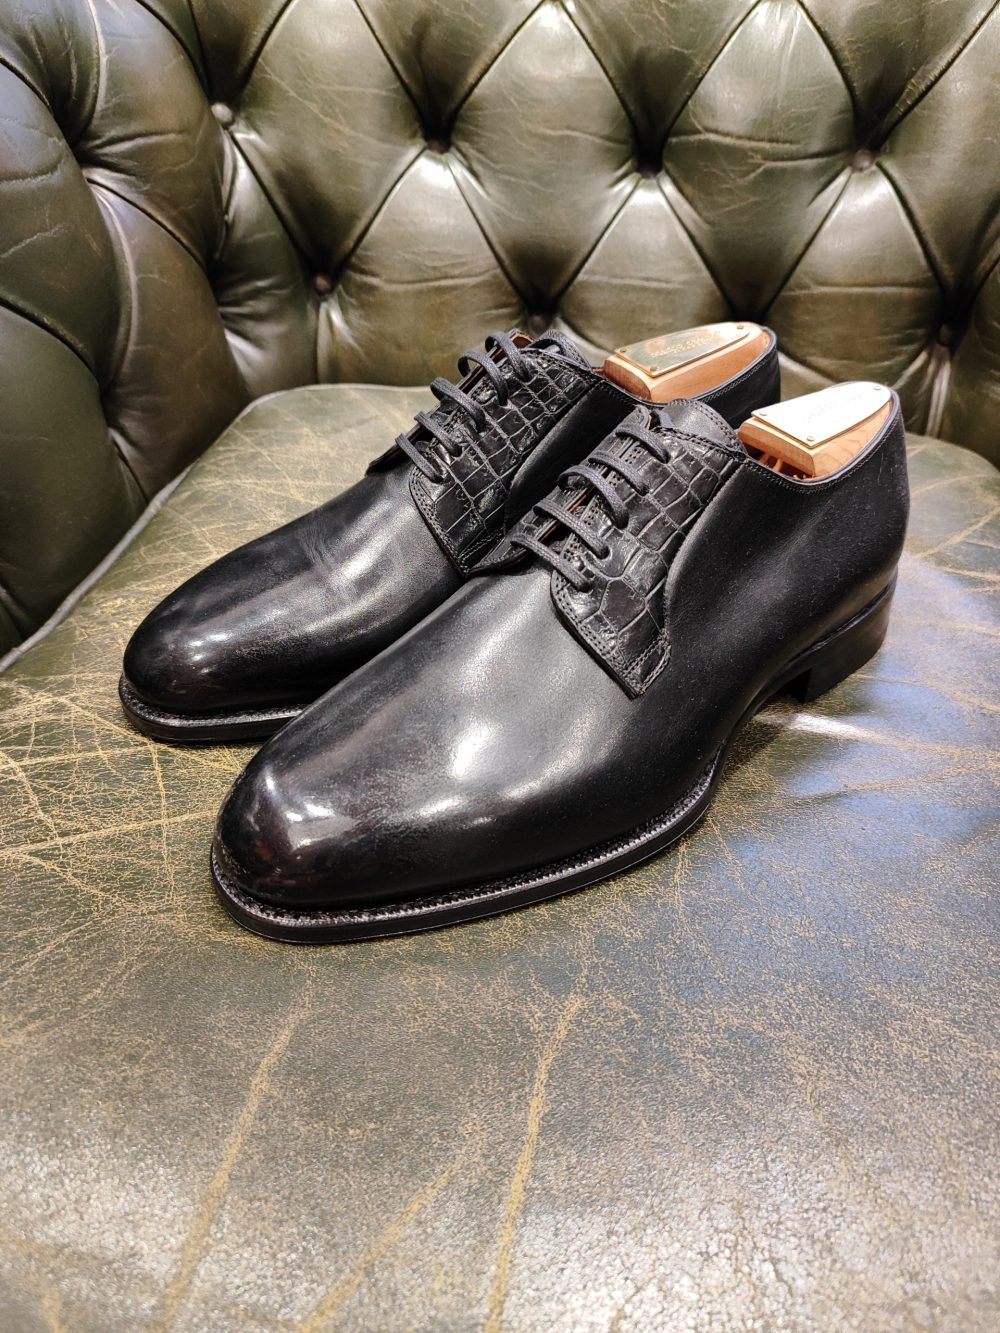 Mario Bemer Firenze black calf and croco leather derby blucher shoes